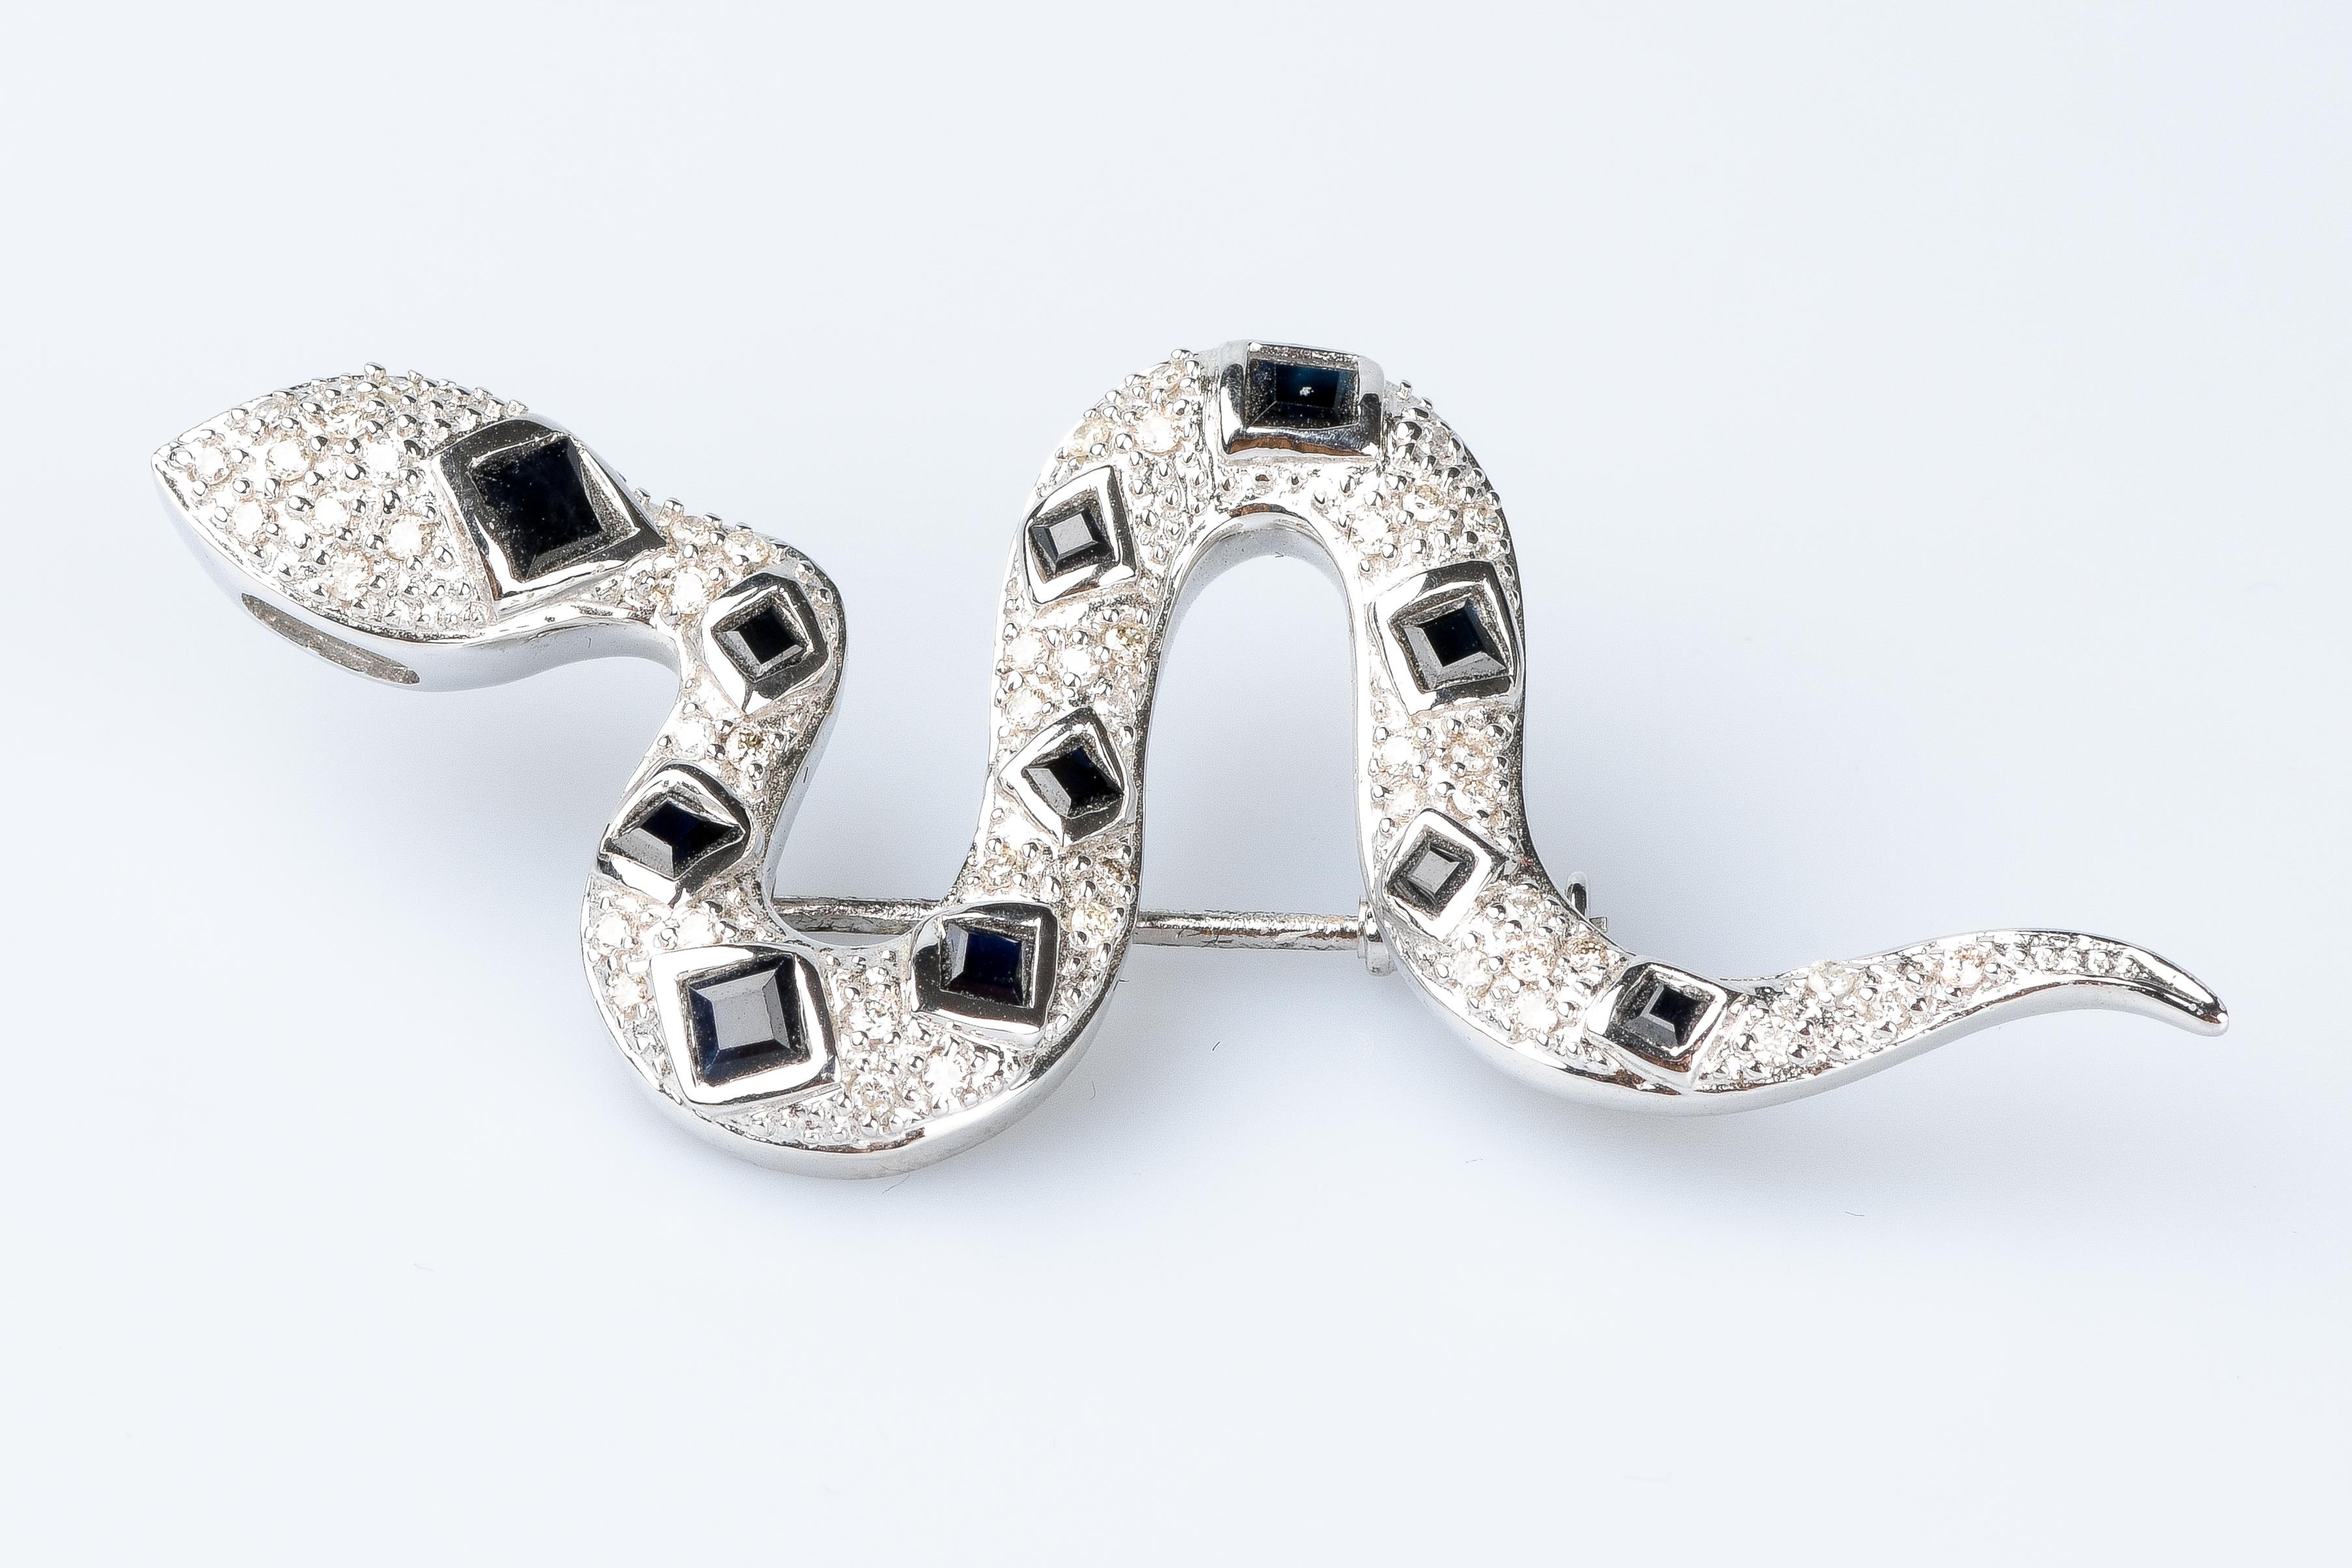 18 carat white gold snake brooch designed with 49 round brillant cut diamonds weighing 0.49 carats, 4 square cut sapphires weighing 0.44 carats 8 square cut sapphires weighing 0.24 carats.

Quality of the diamond
Color : H
Clarity : SI

 Weight :